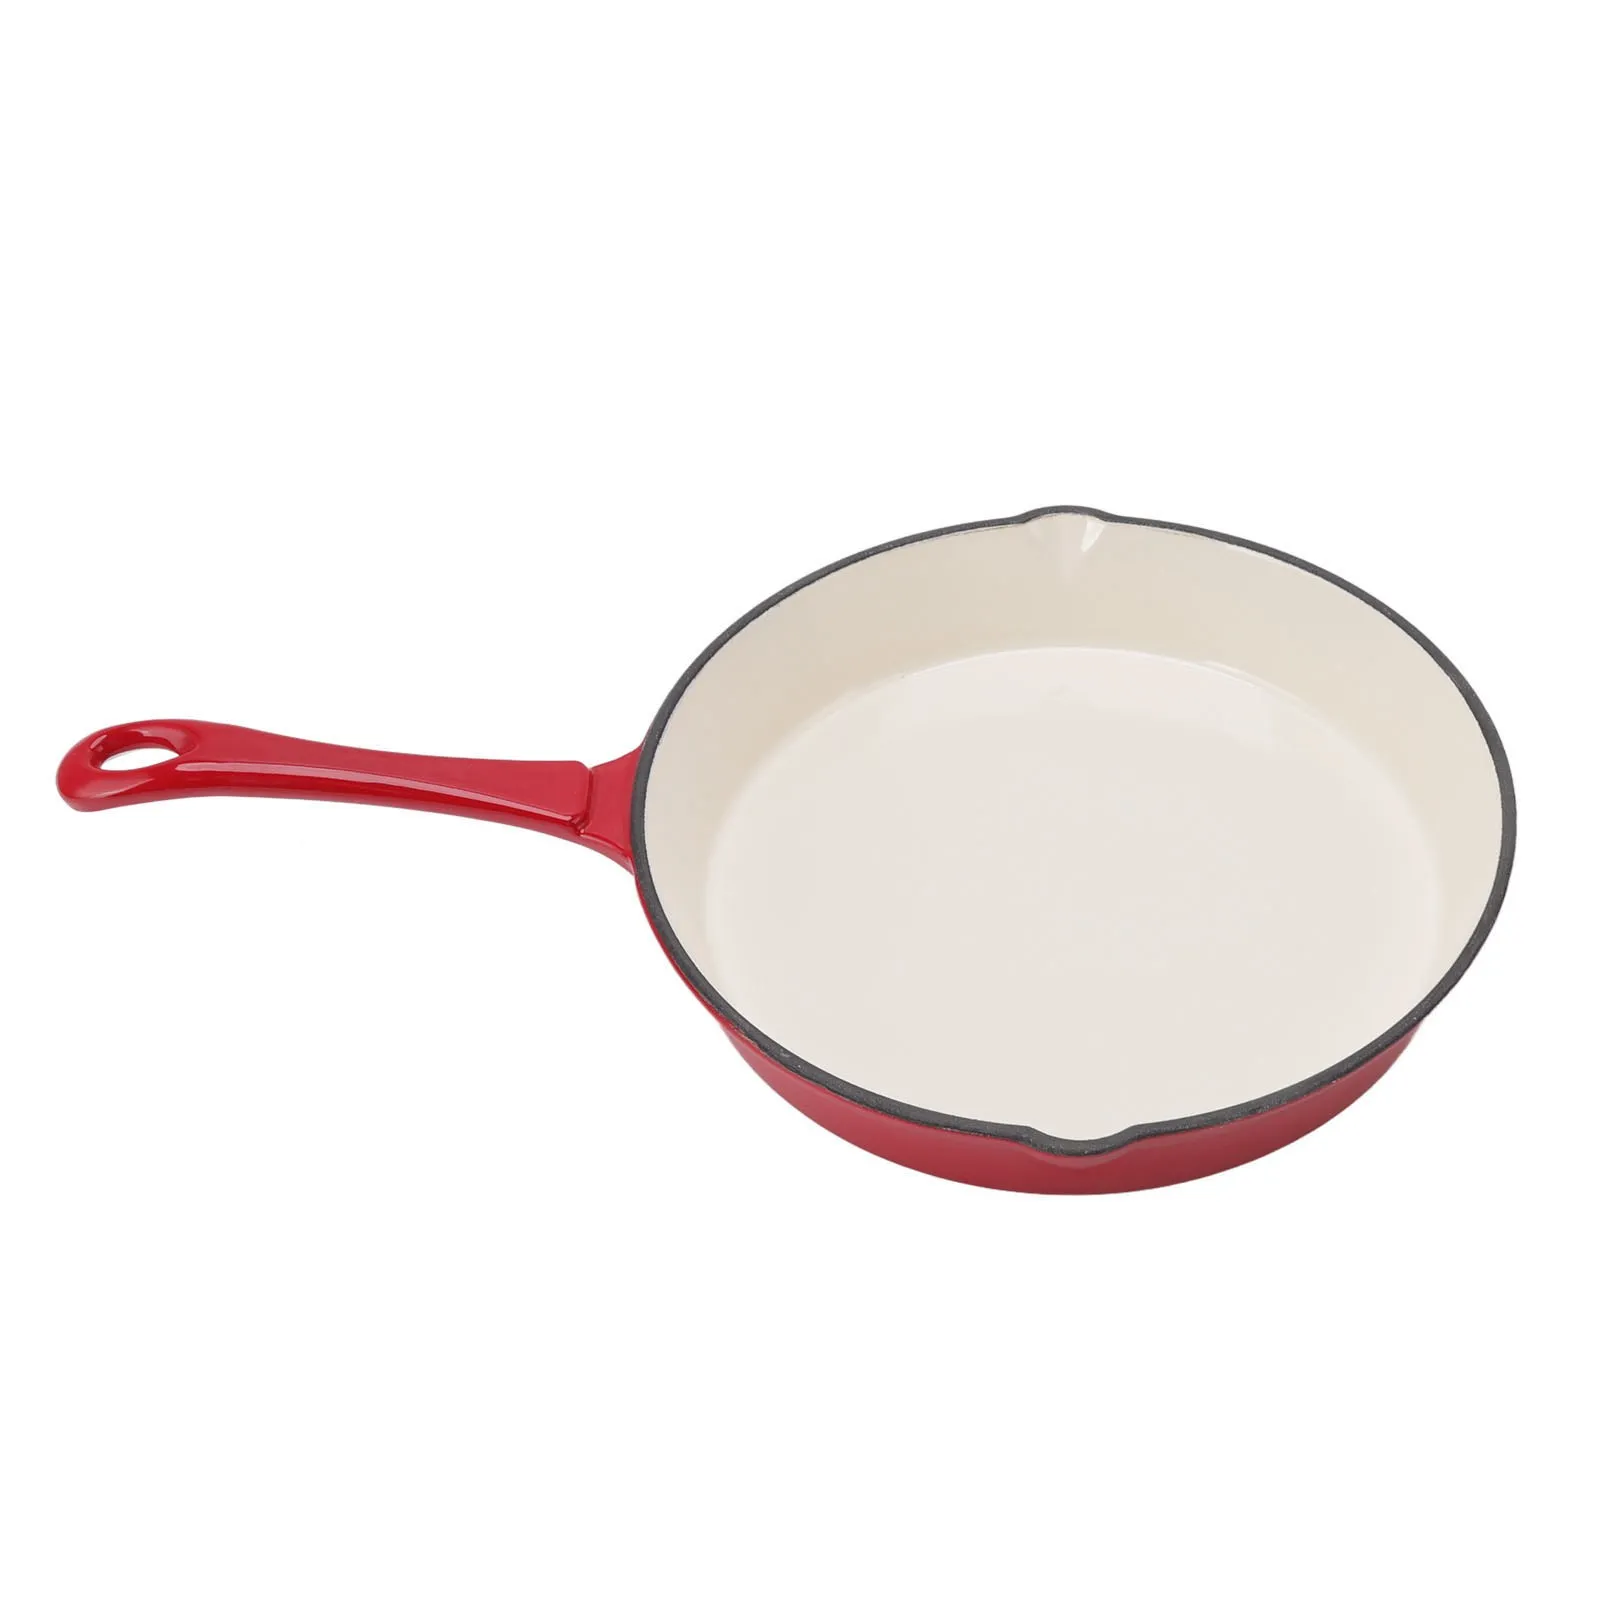 Frying Skillet Enameled Cast Iron Skillet One Piece Convenient Practical for Kitchen for Grilling